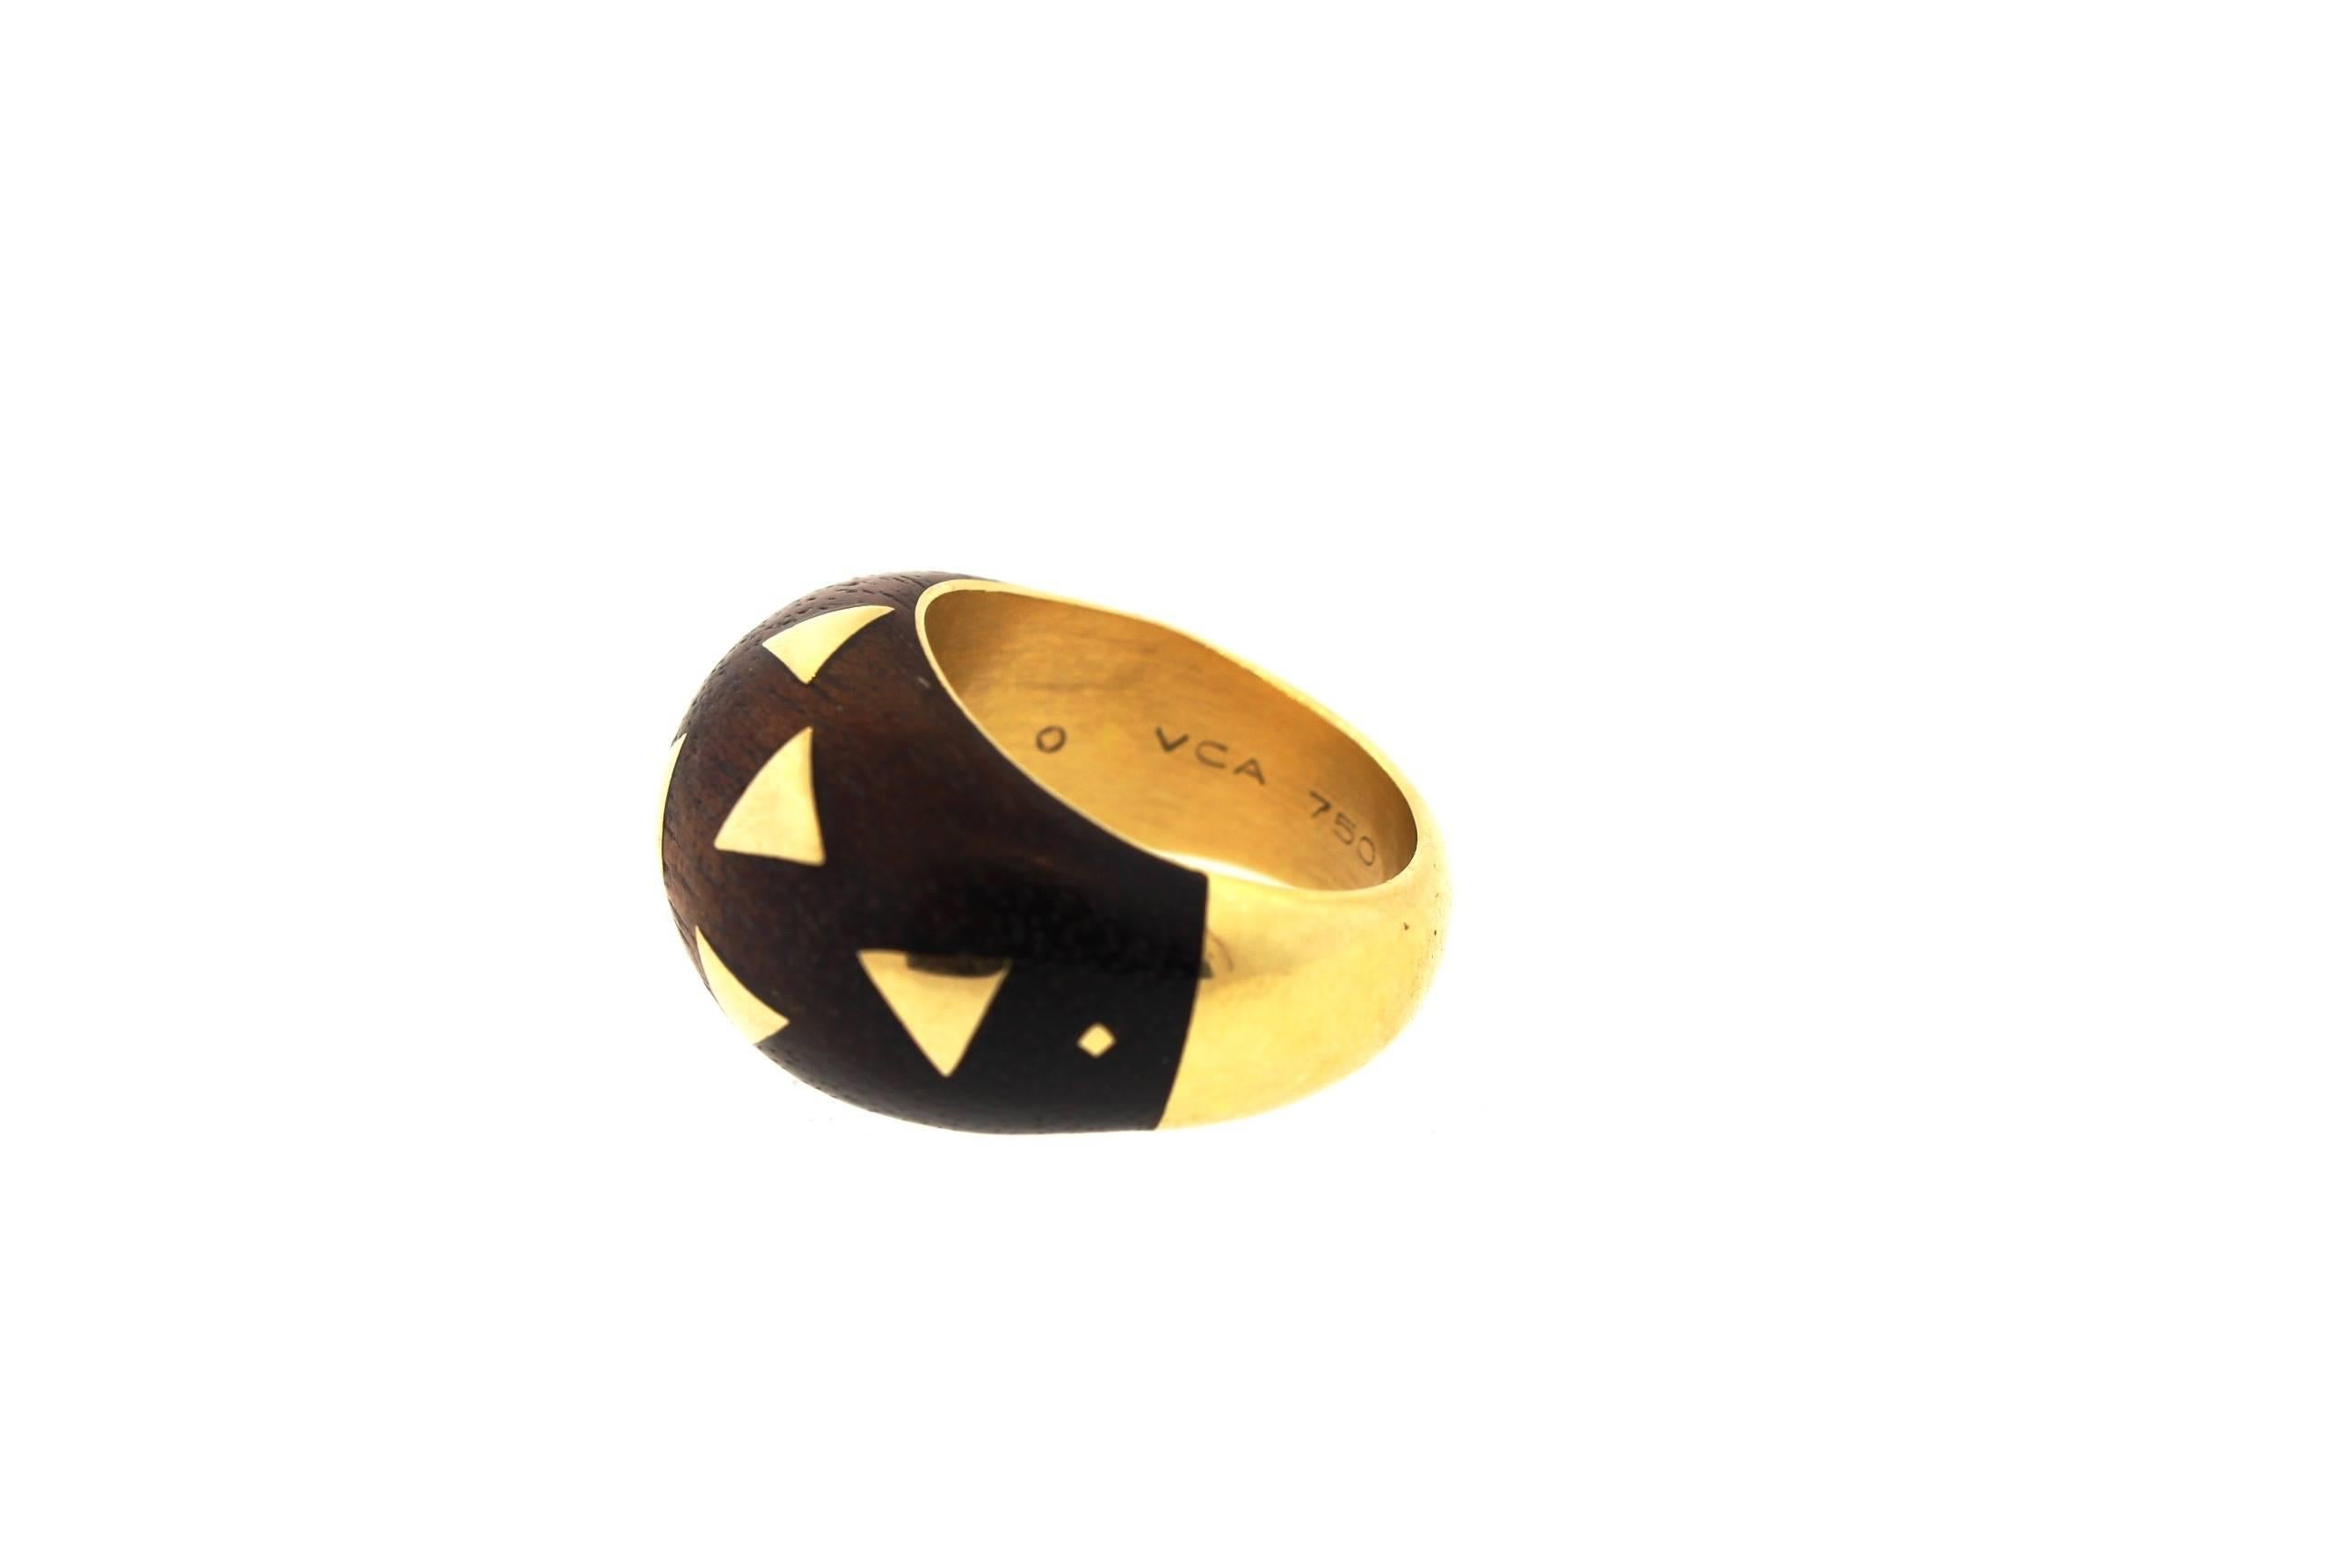 A fun wood and 18k gold bombe ring by Van Cleef & Arpels, circa 1960. The ring is made with a tan sandalwood, set with gold triangles. The ring has great texture and shape. It is signed VCA 750 B5867 B64. The ring is currently as size 6 and would be